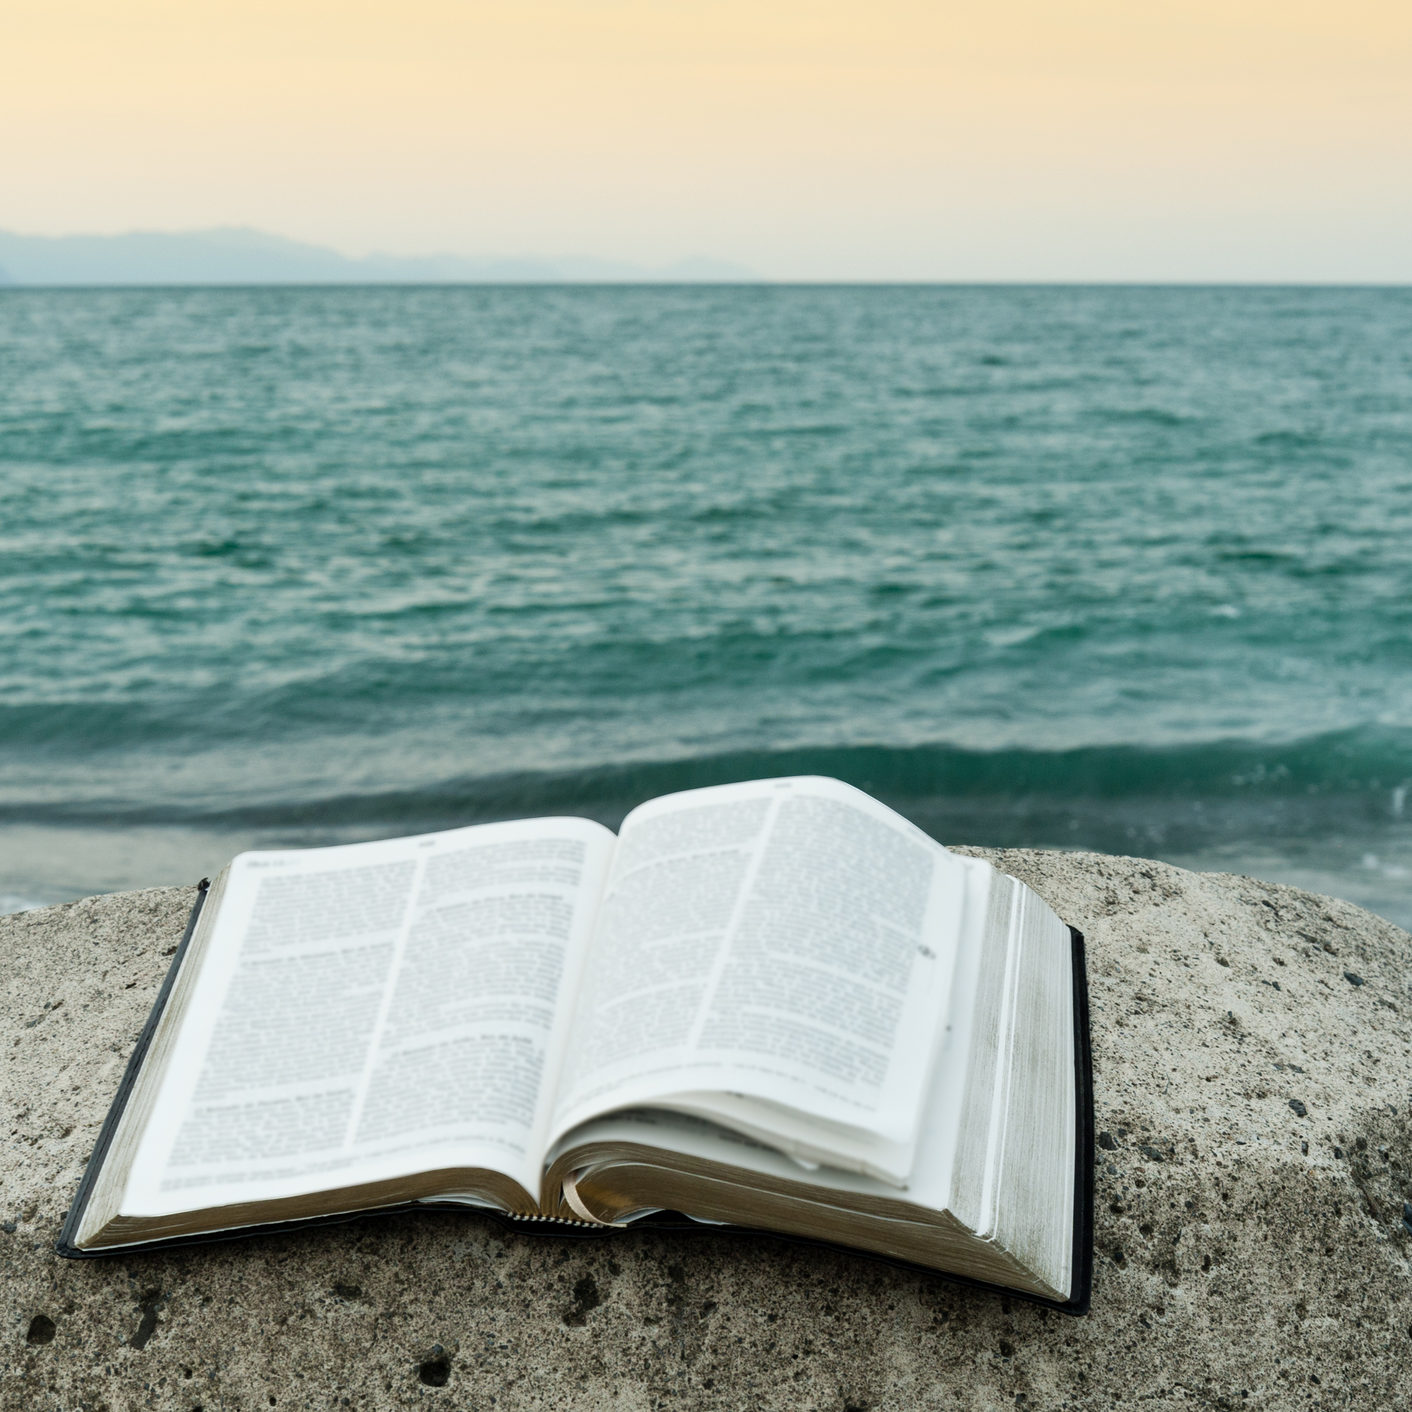 Open bible on top of a rock in front of the sea of greenish waters and an orange sky. Copy the space.